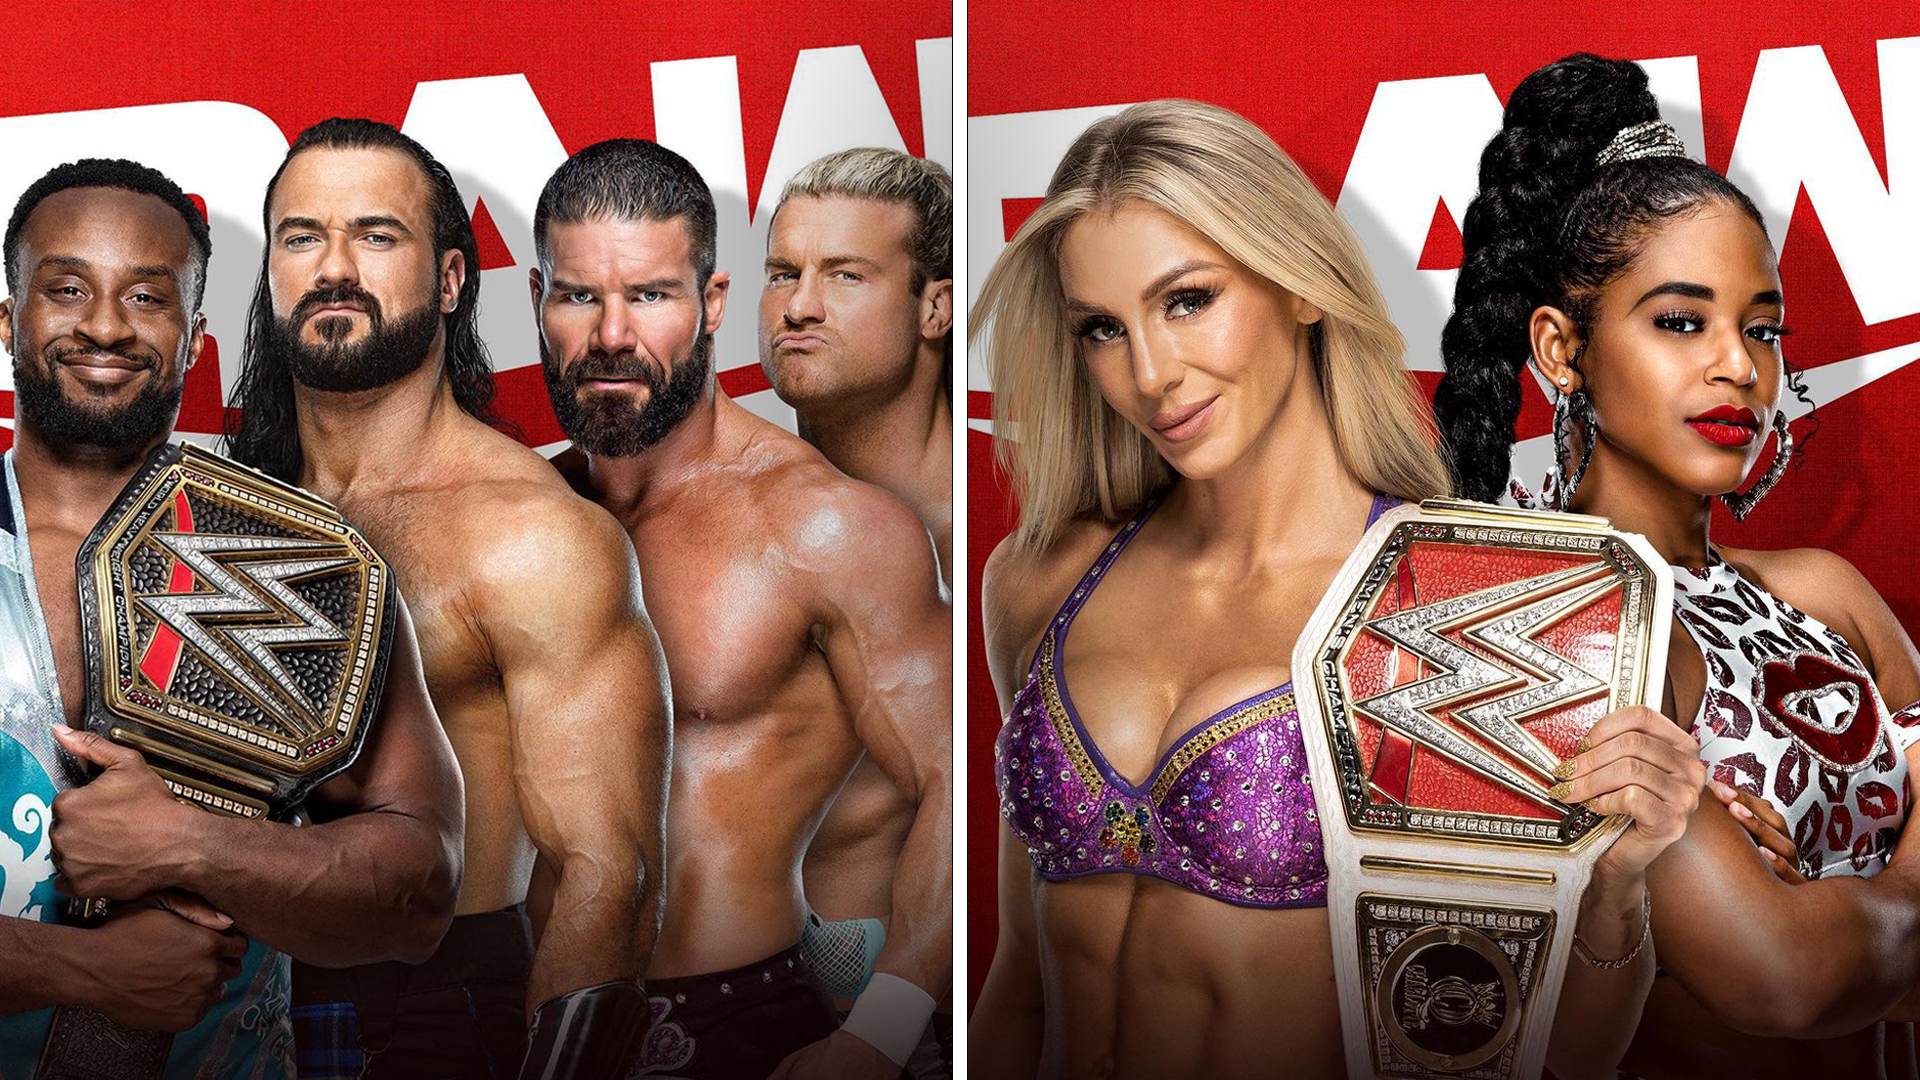 Preview For WWE RAW: King Of The Ring & Queen's Crown Semifinals, Women's Championship Match & More